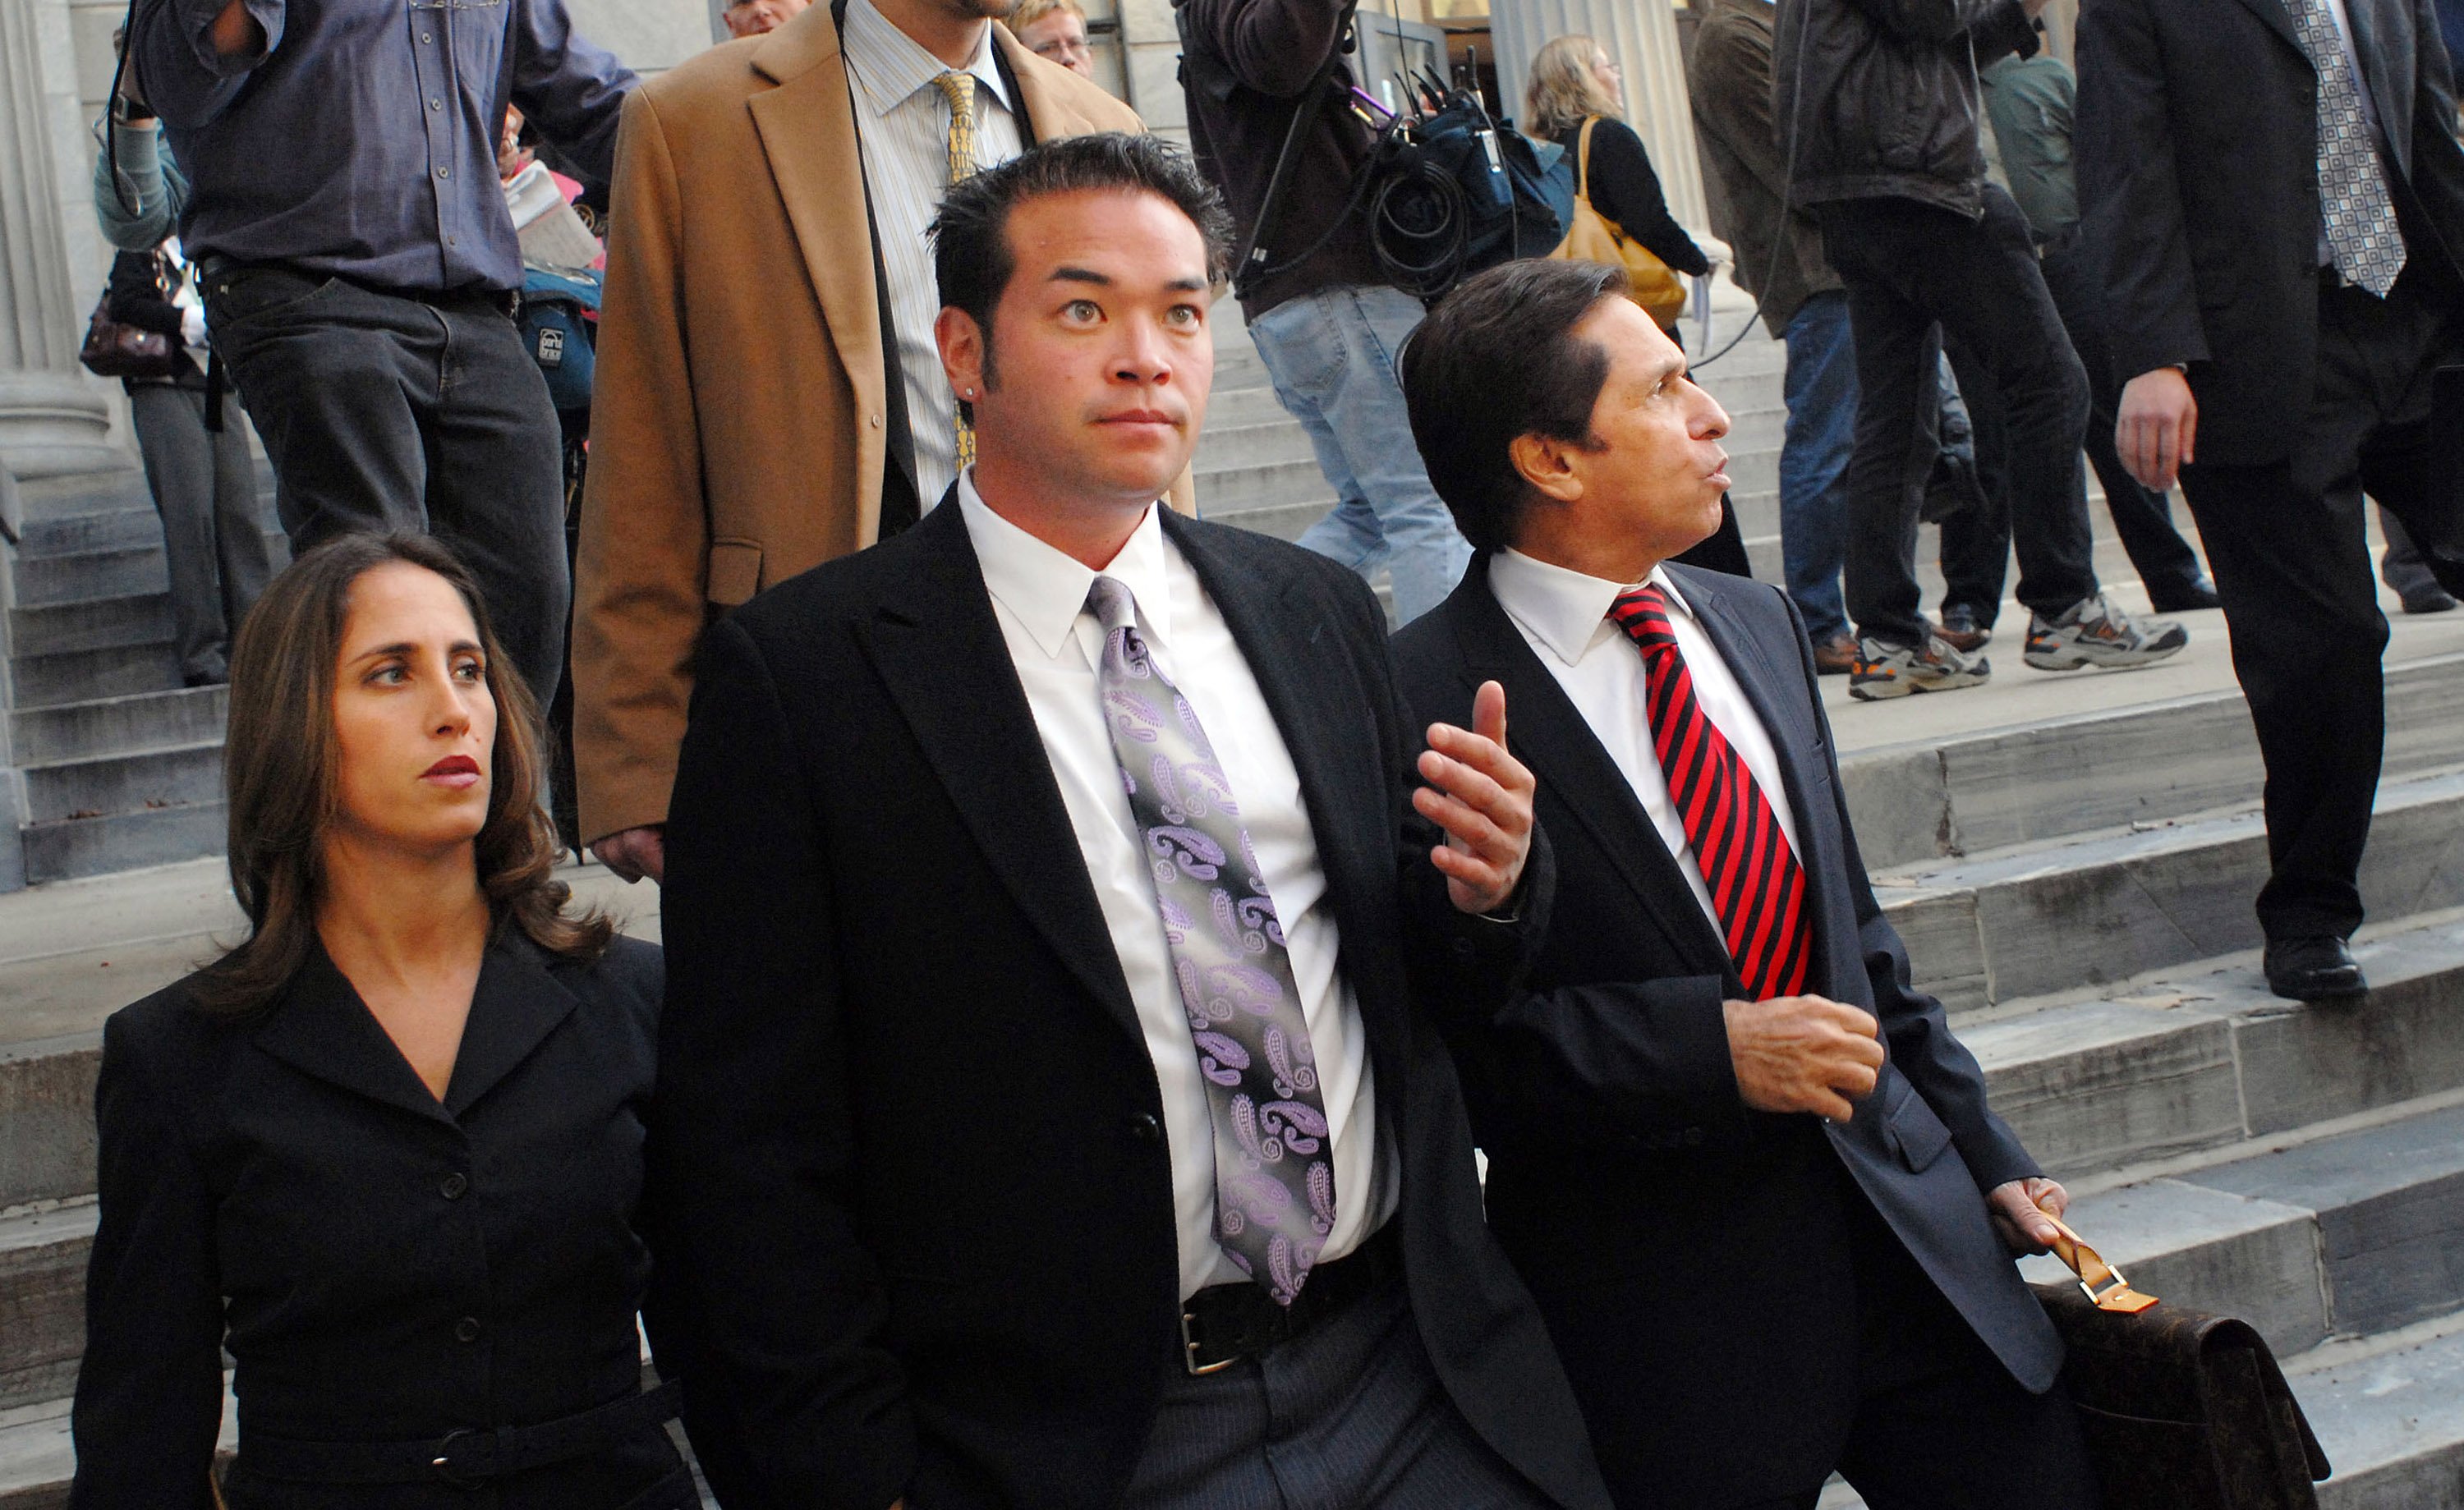 Jon Gosselin with the media as he leaves Montgomery County Courthouse after a hearing about his divorce from Kate Gosselin on October 26, 2009, in Norristown, Pennsylvania. | Source: Getty Images